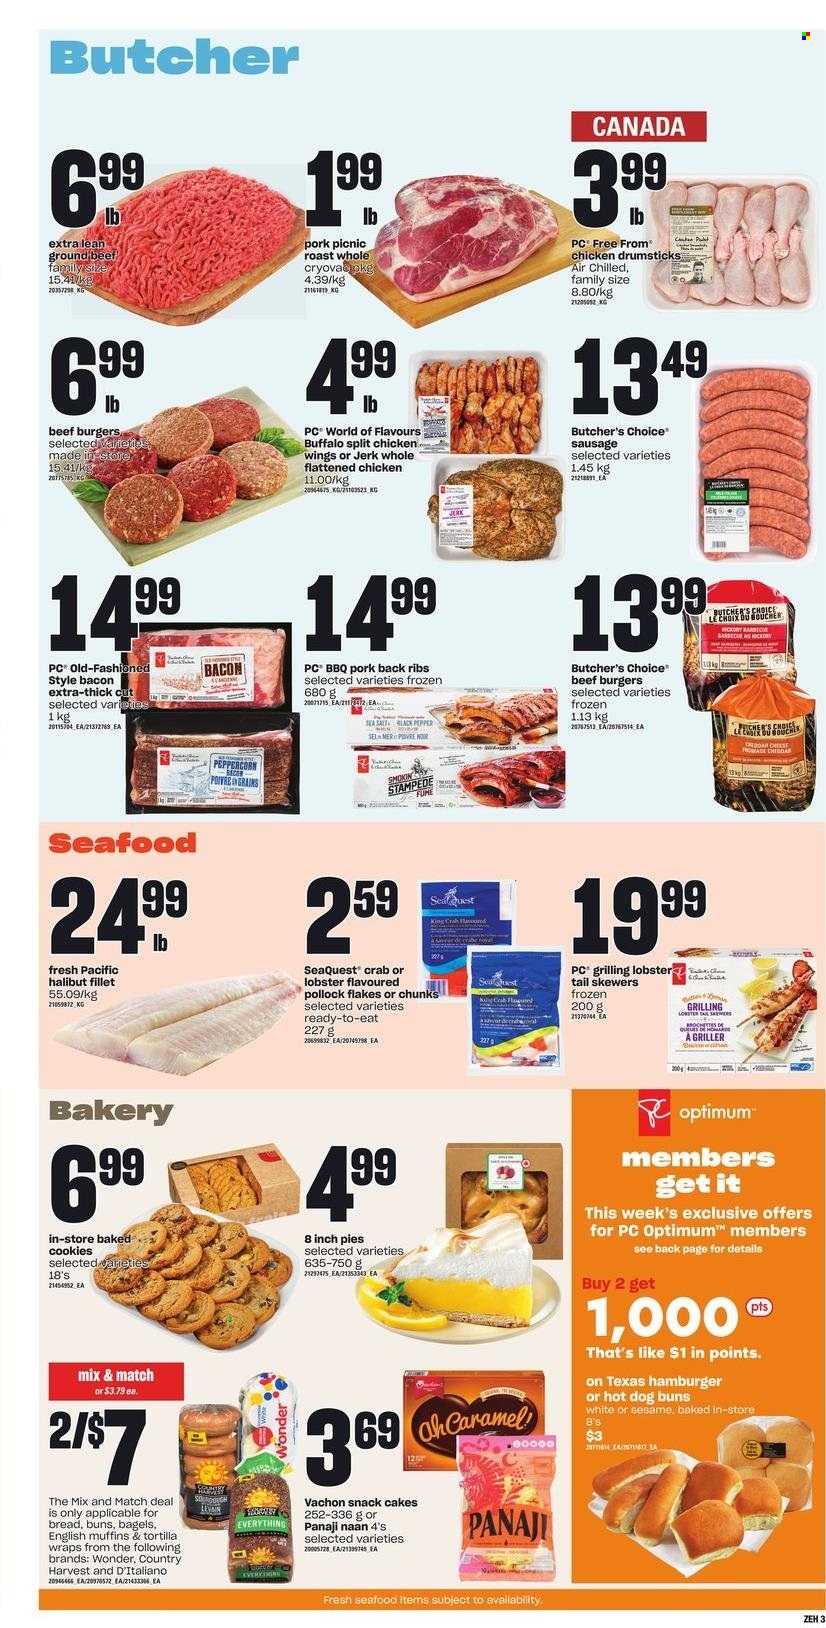 thumbnail - Zehrs Flyer - May 19, 2022 - May 25, 2022 - Sales products - bagels, english muffins, tortillas, cake, buns, wraps, lobster, halibut, pollock, seafood, crab, beef burger, bacon, sausage, Country Harvest, chicken wings, cookies, snack, chicken drumsticks, chicken, beef meat, ground beef, pork meat, pork ribs, pork back ribs, Optimum, Lack. Page 4.